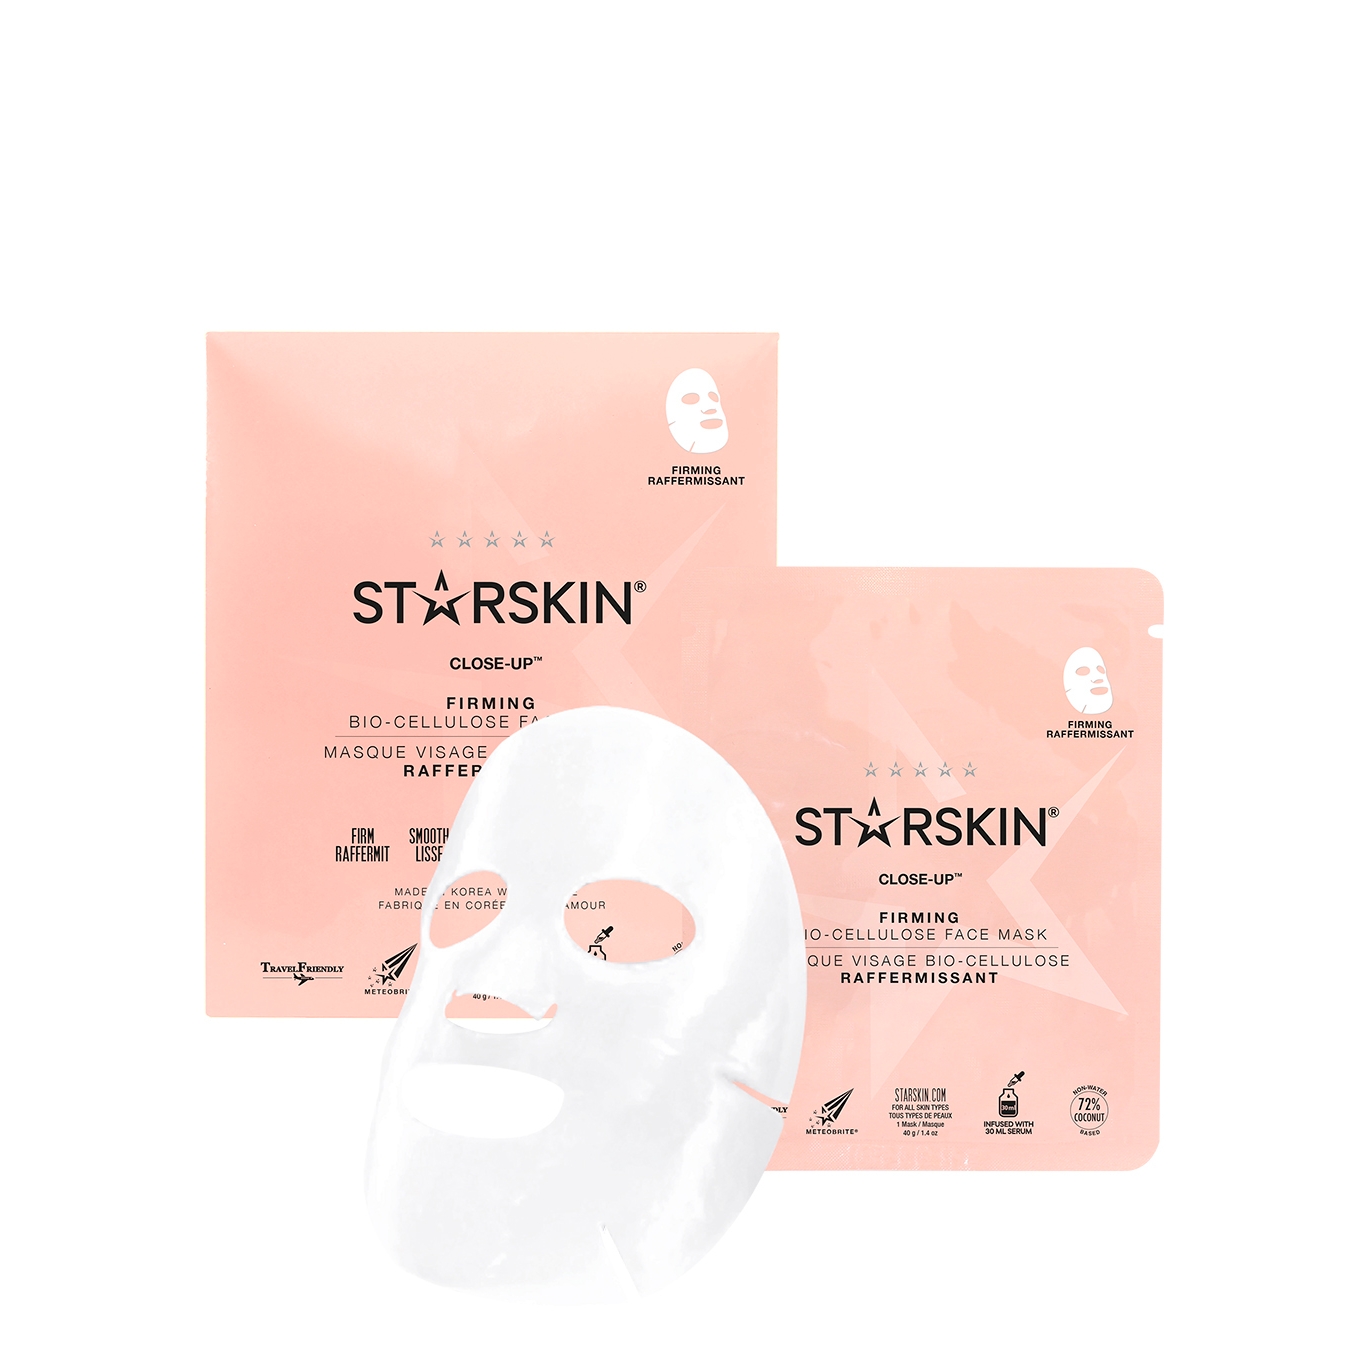 Close-up Firming Bio-Cellulose Face Mask